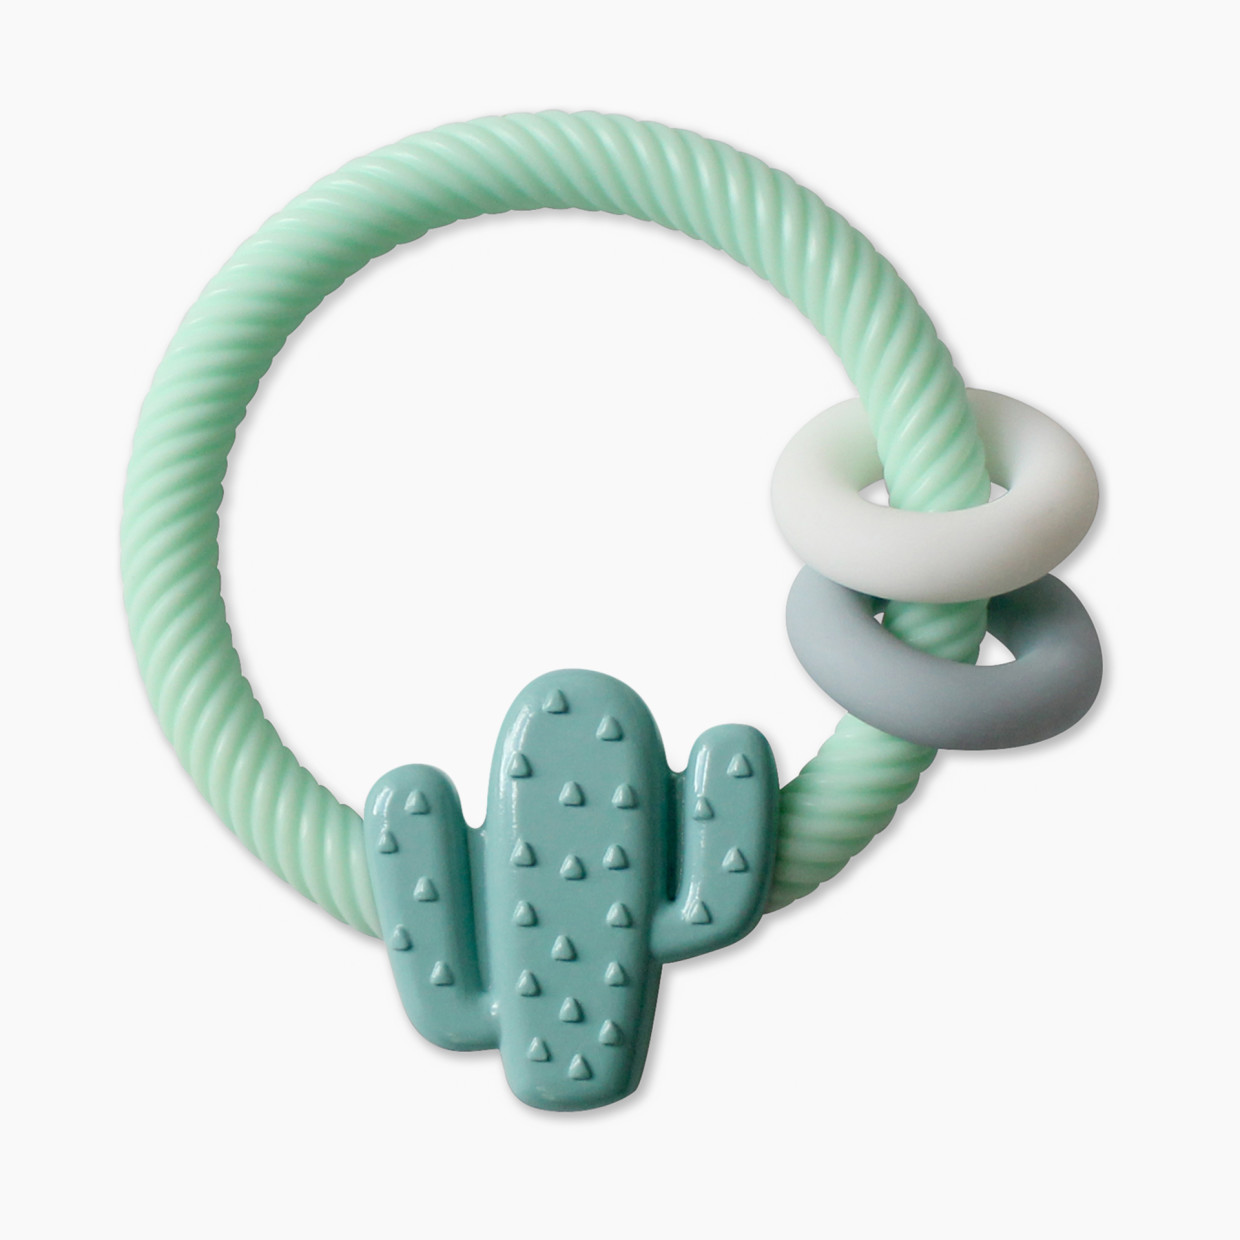 Itzy Ritzy Silicone Teether with Rattle - Cactus.